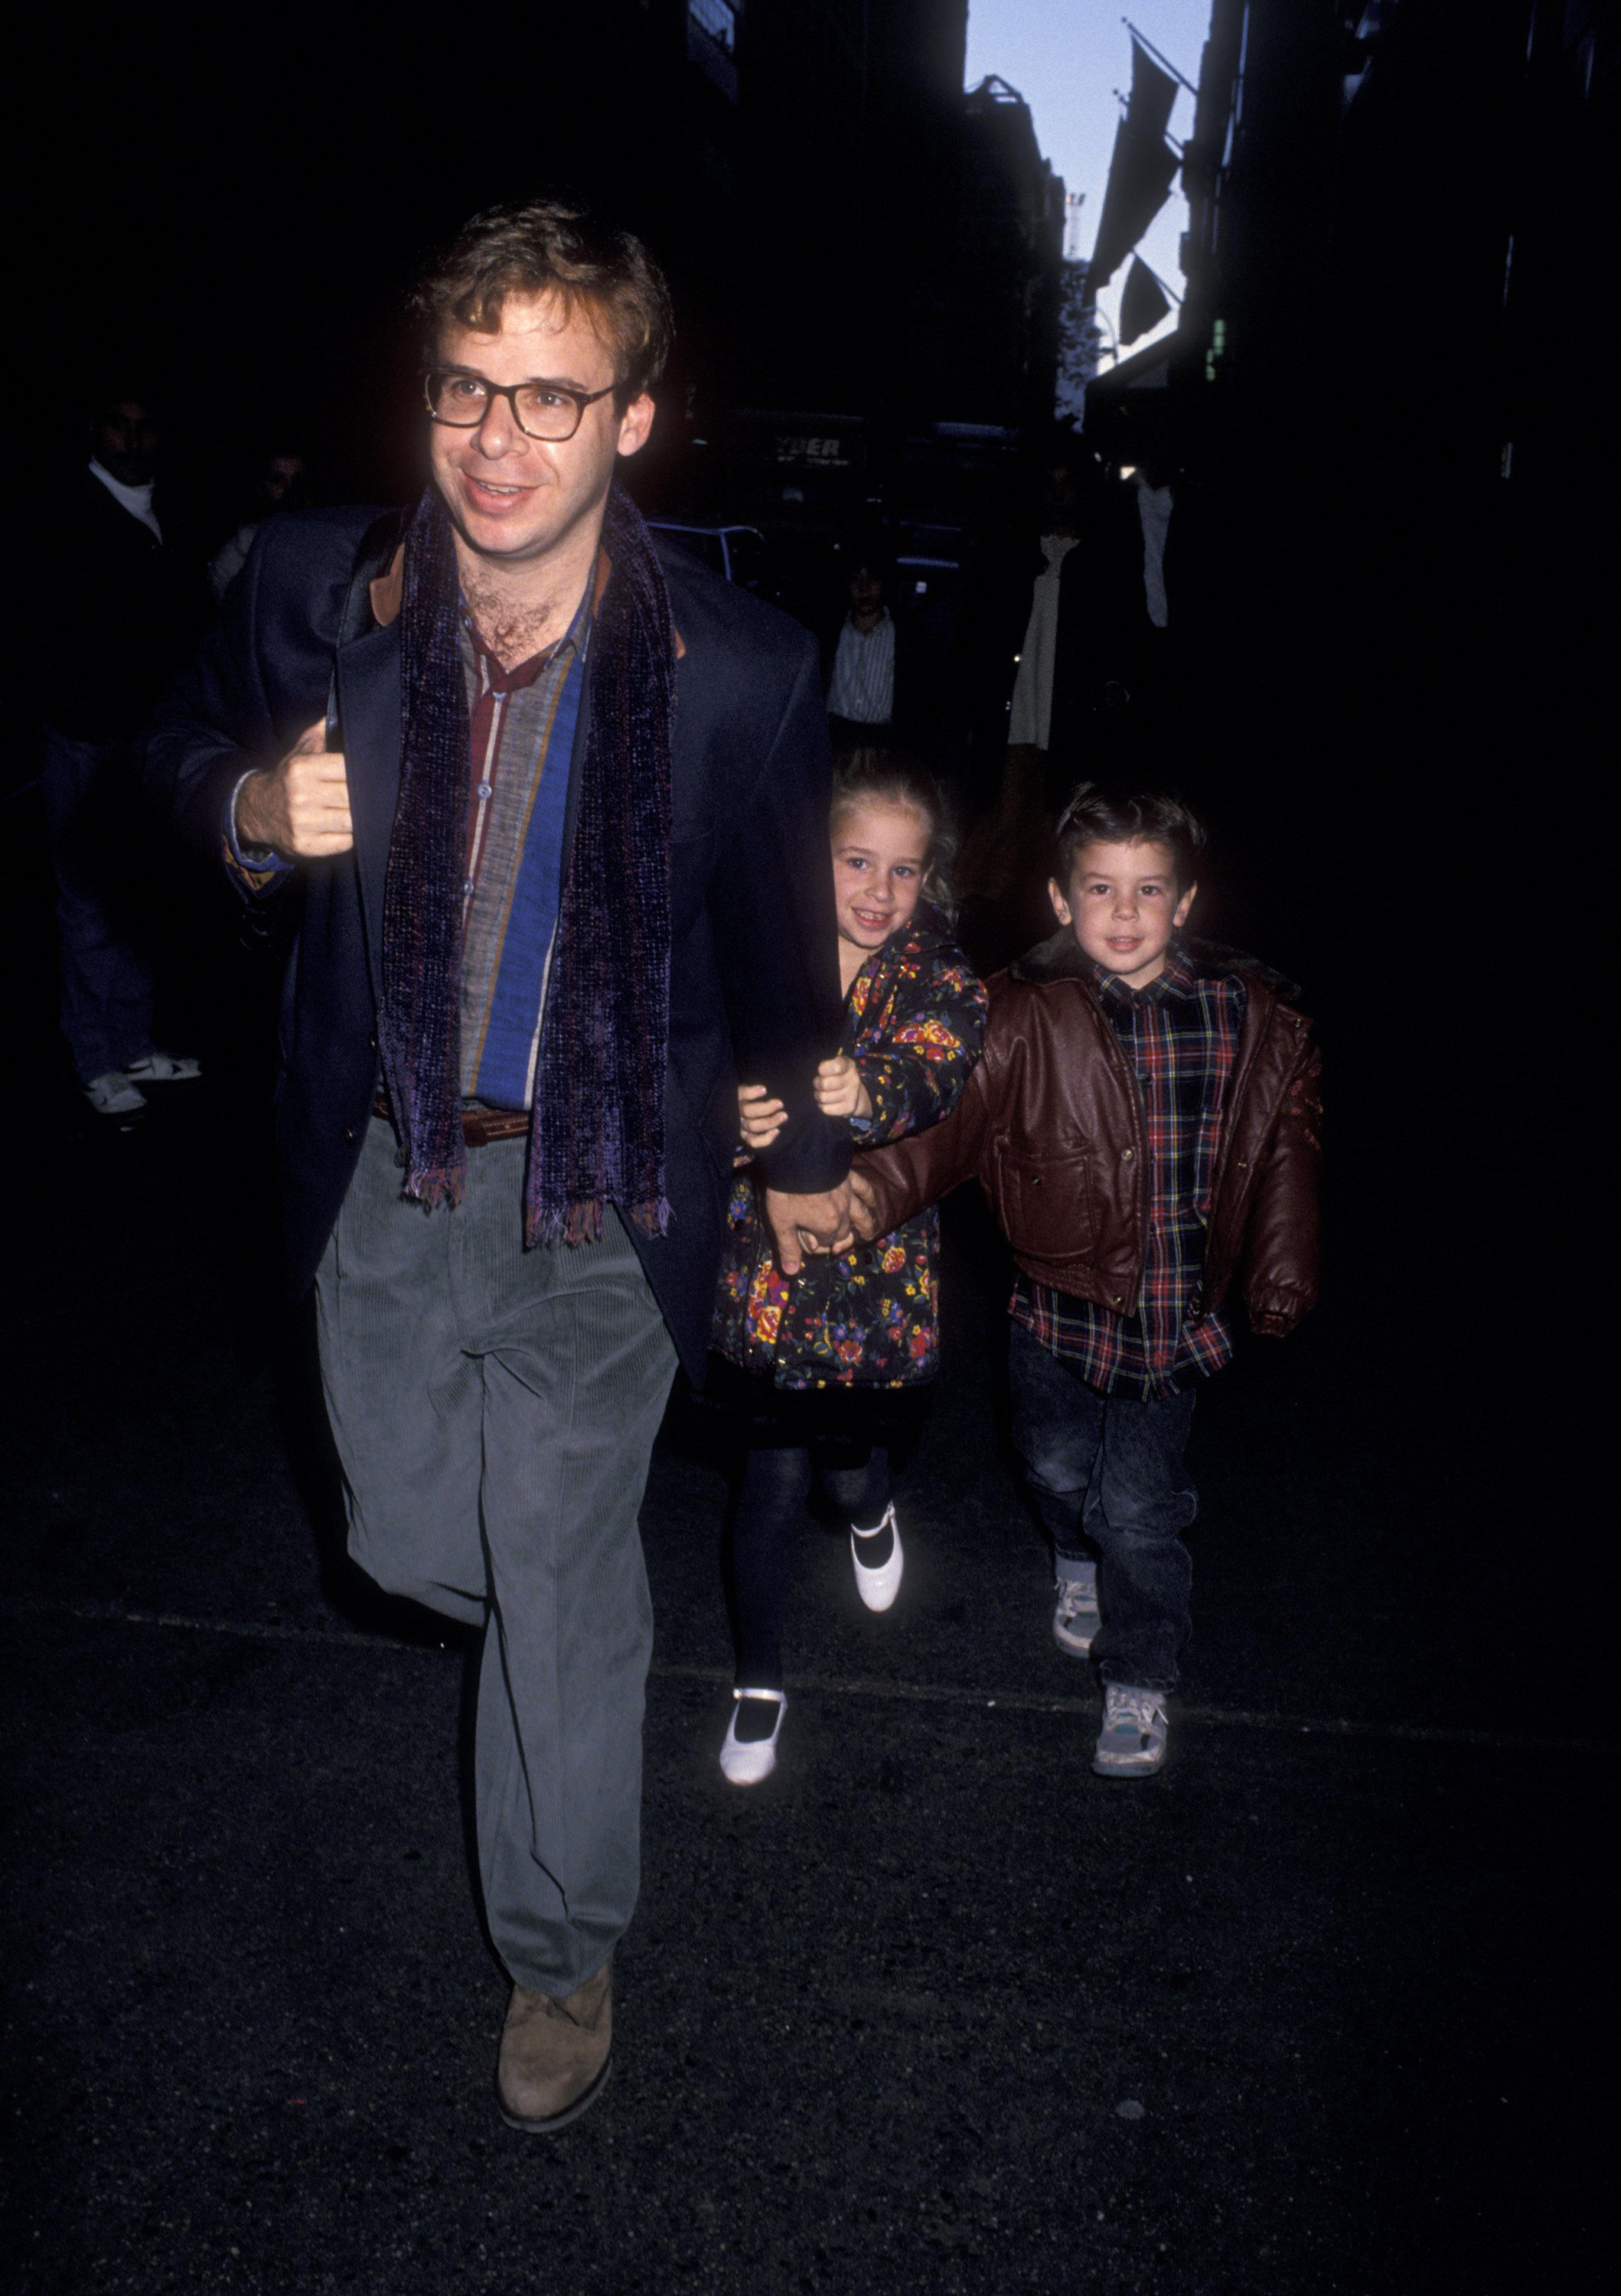 Rick Moranis and his children at the premiere of "The Nutcracker" on November 21, 1993, in New York City | Source: Getty Images